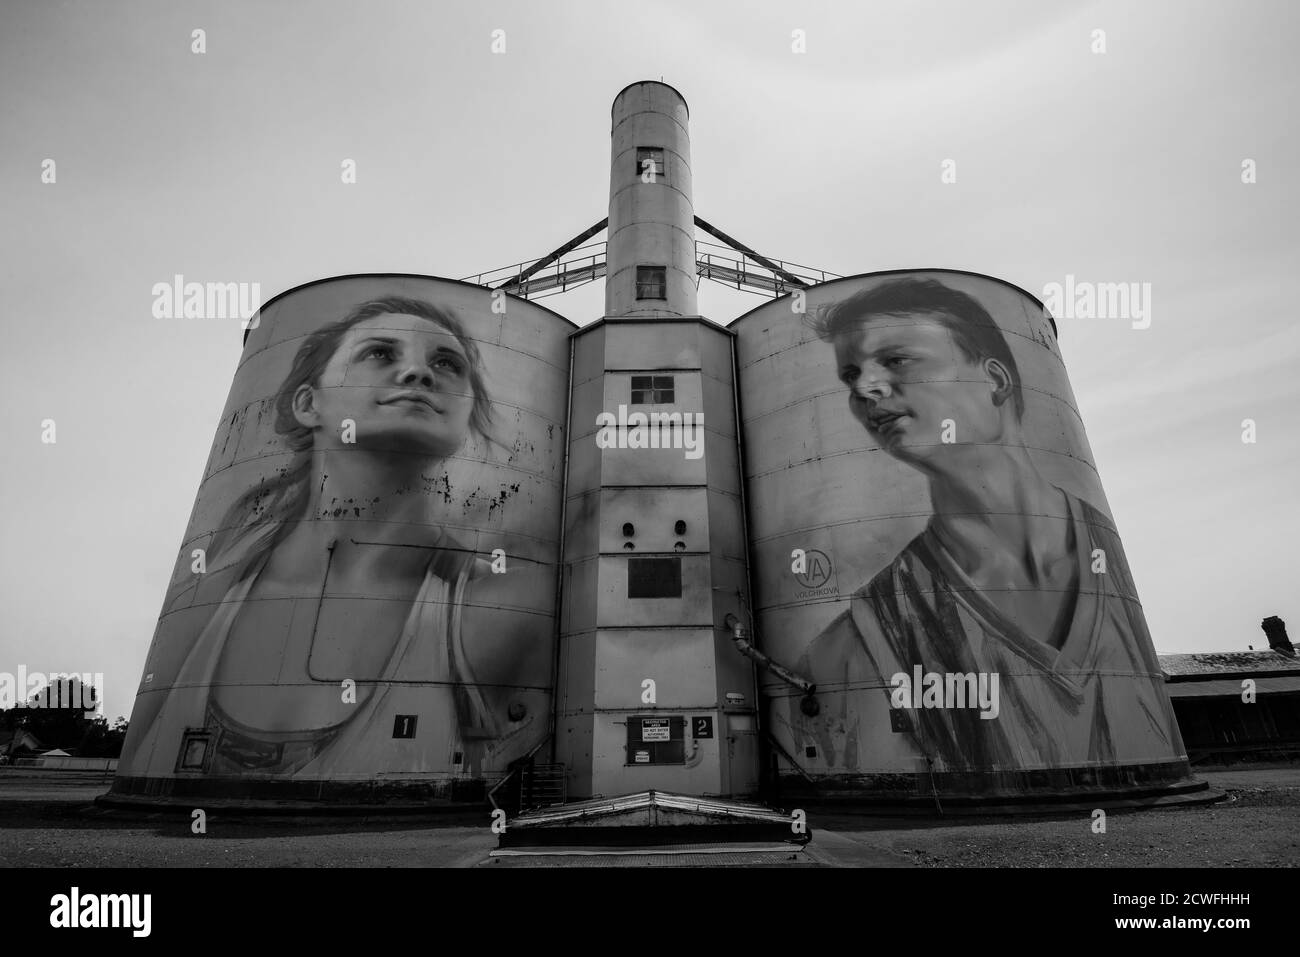 Silo Art Trail iat Rupanyup n Country Victoria, Australie Banque D'Images